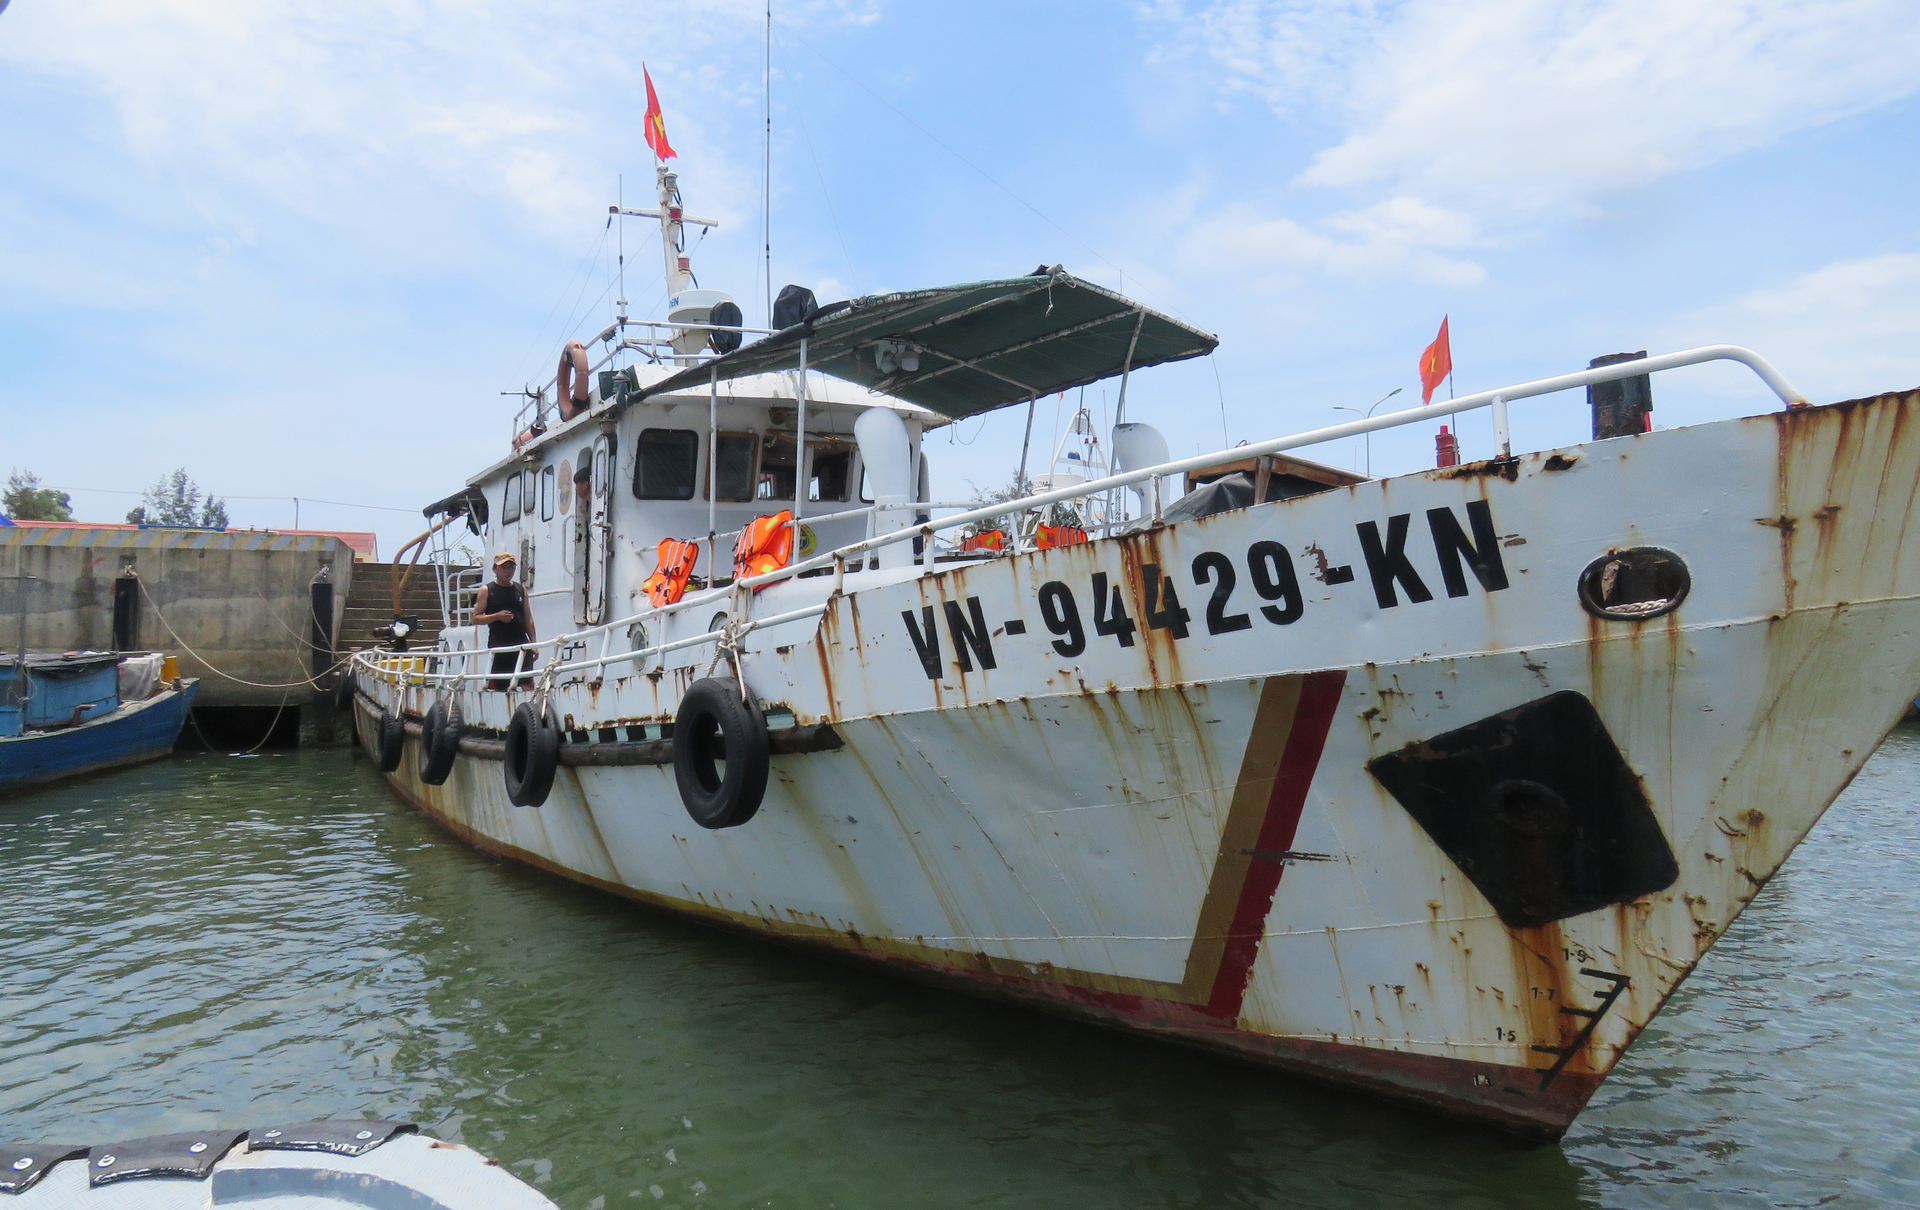 The ship VN-94429-KN has deteriorated and needs repair to meet the requirements of patrolling and controlling at sea. Photo: T. Phung.